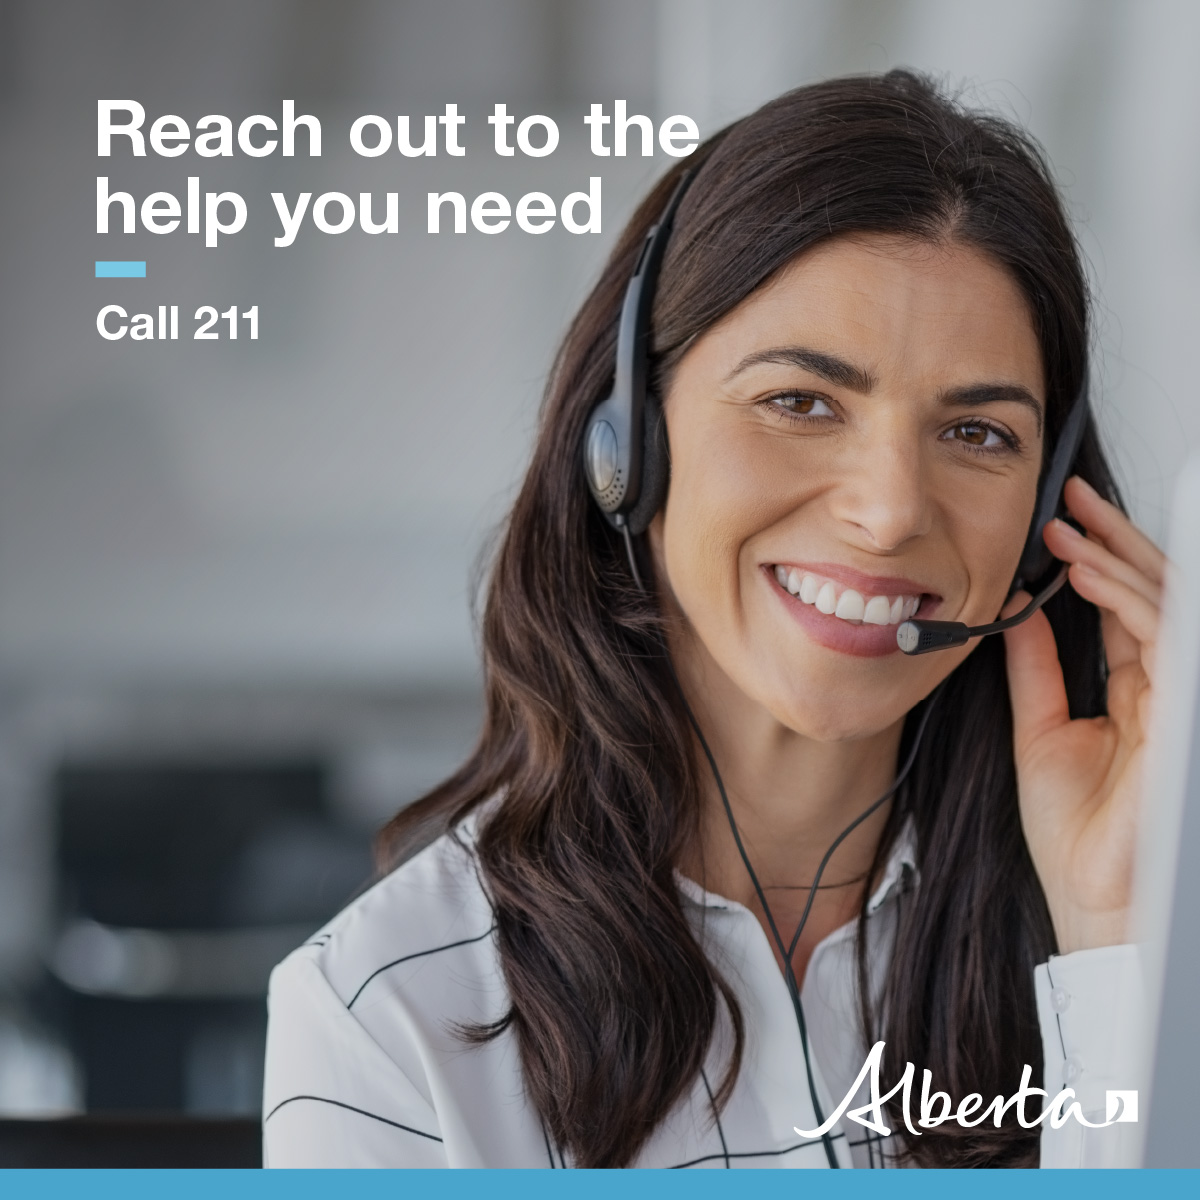 Need assistance finding mental health or addiction services in Alberta? Let 211 Alberta be your guide. 211’s dedicated team connects you with a wide range of community resources and support networks. Reach out today by calling, texting, or visiting ab.211.ca.